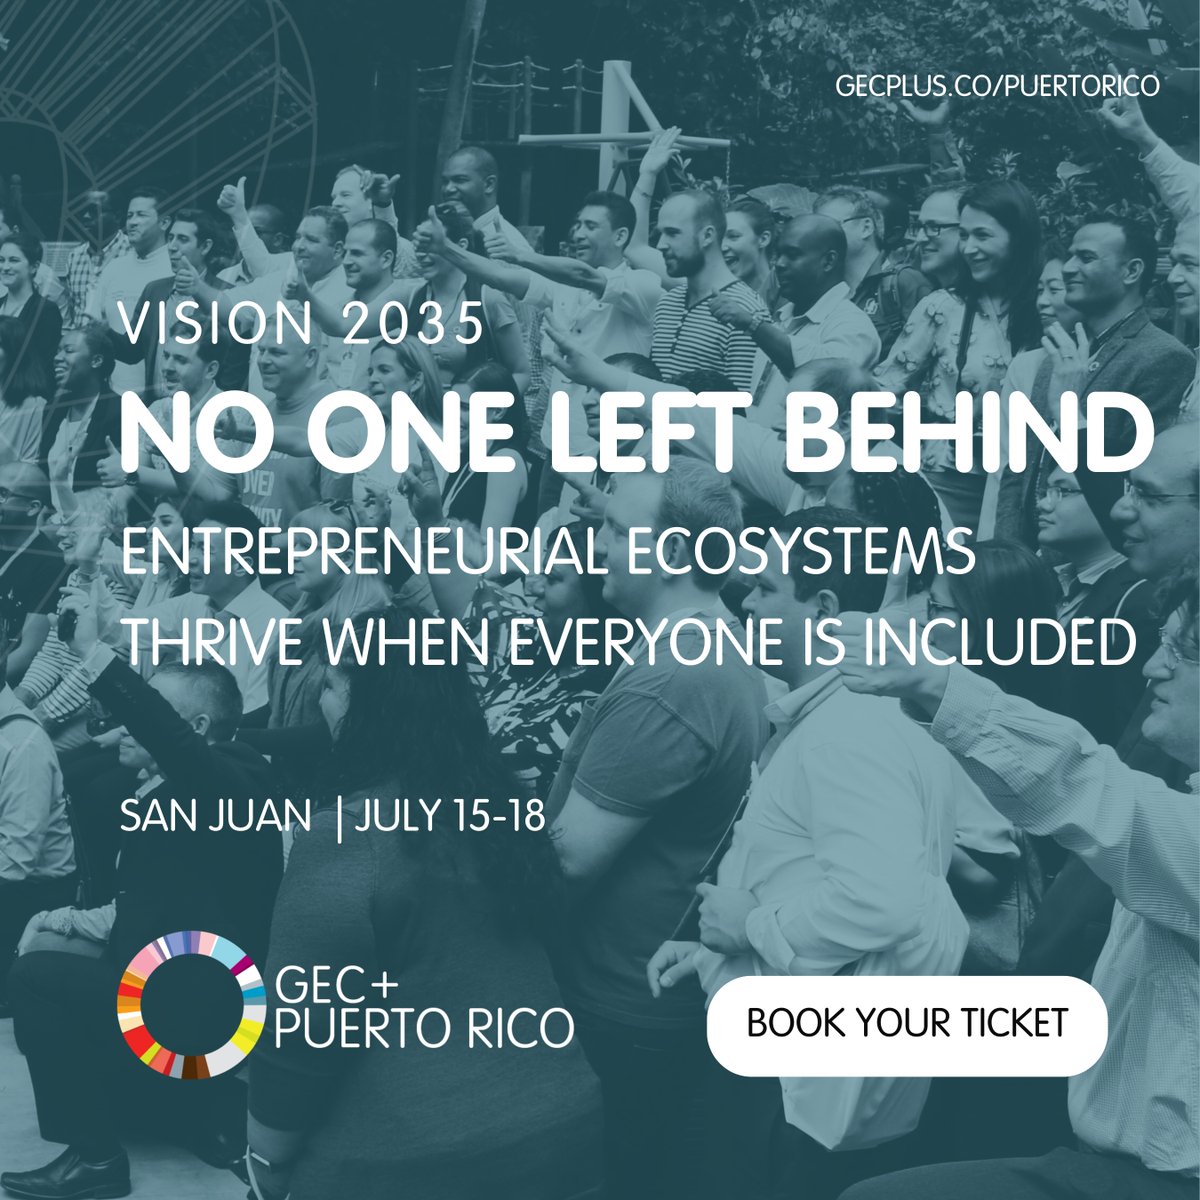 At #GECPLUSPR, we'll explore initiatives to bring historically underrepresented communities into the entrepreneurial economy. Join us July 15-18: genglobal.org/gec-plus/puert… #startup #founder #investor #policy #education #research #empredimiento #inversionistas #emprendedores